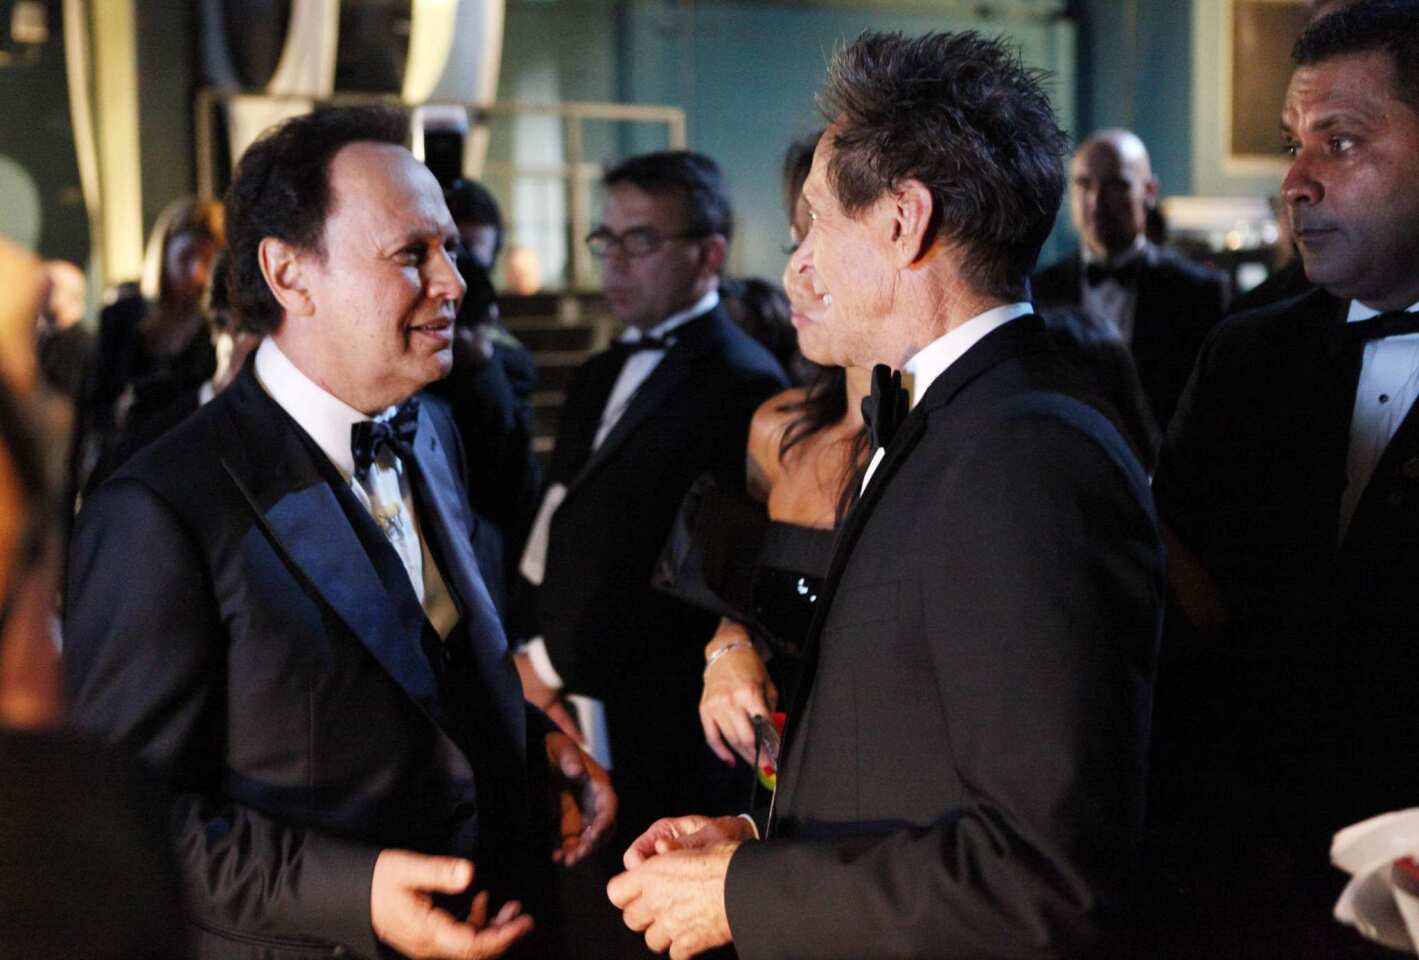 The Oscar host, left, and the Academy Awards producer talk offstage during the telecast.